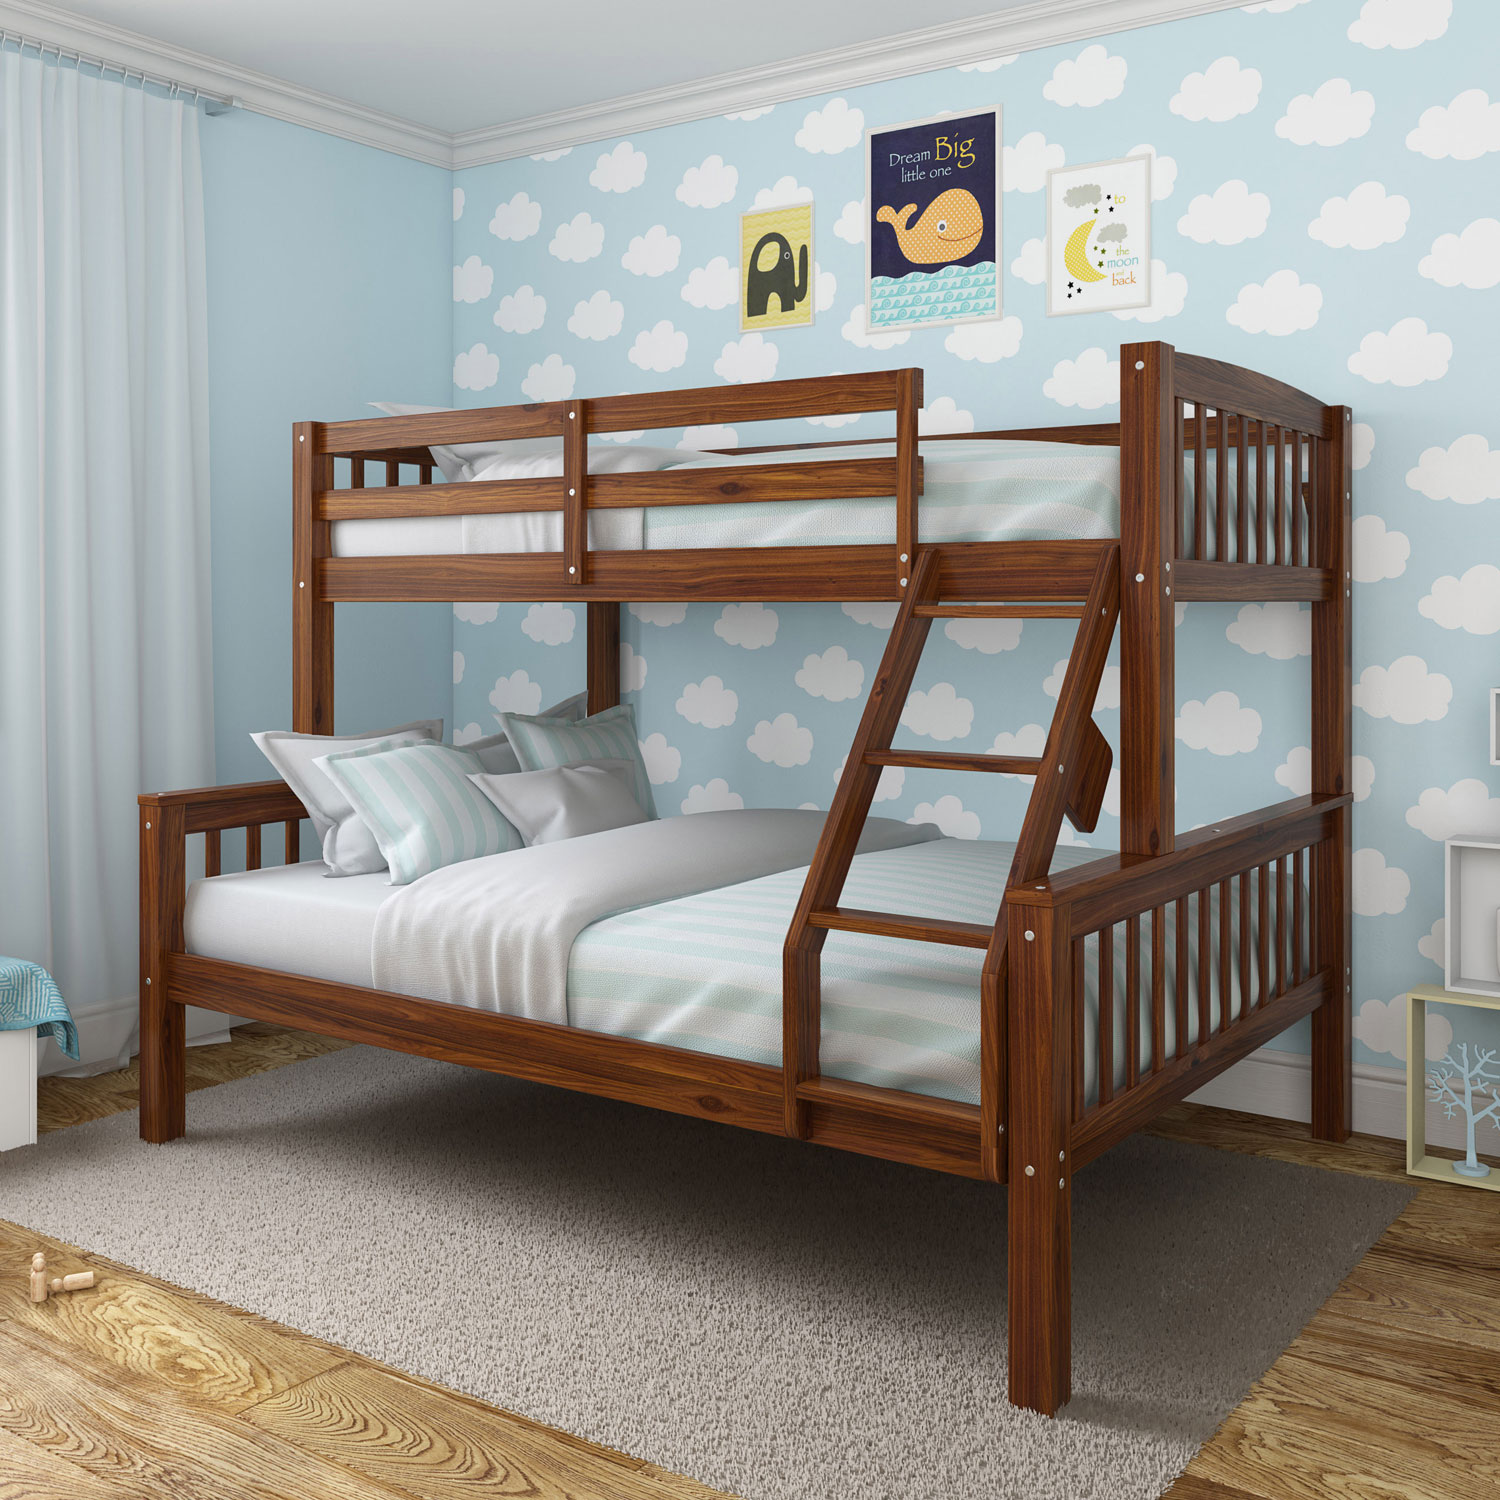 Baby Furniture Dressers: 12+ Baby Bedroom Furniture Images